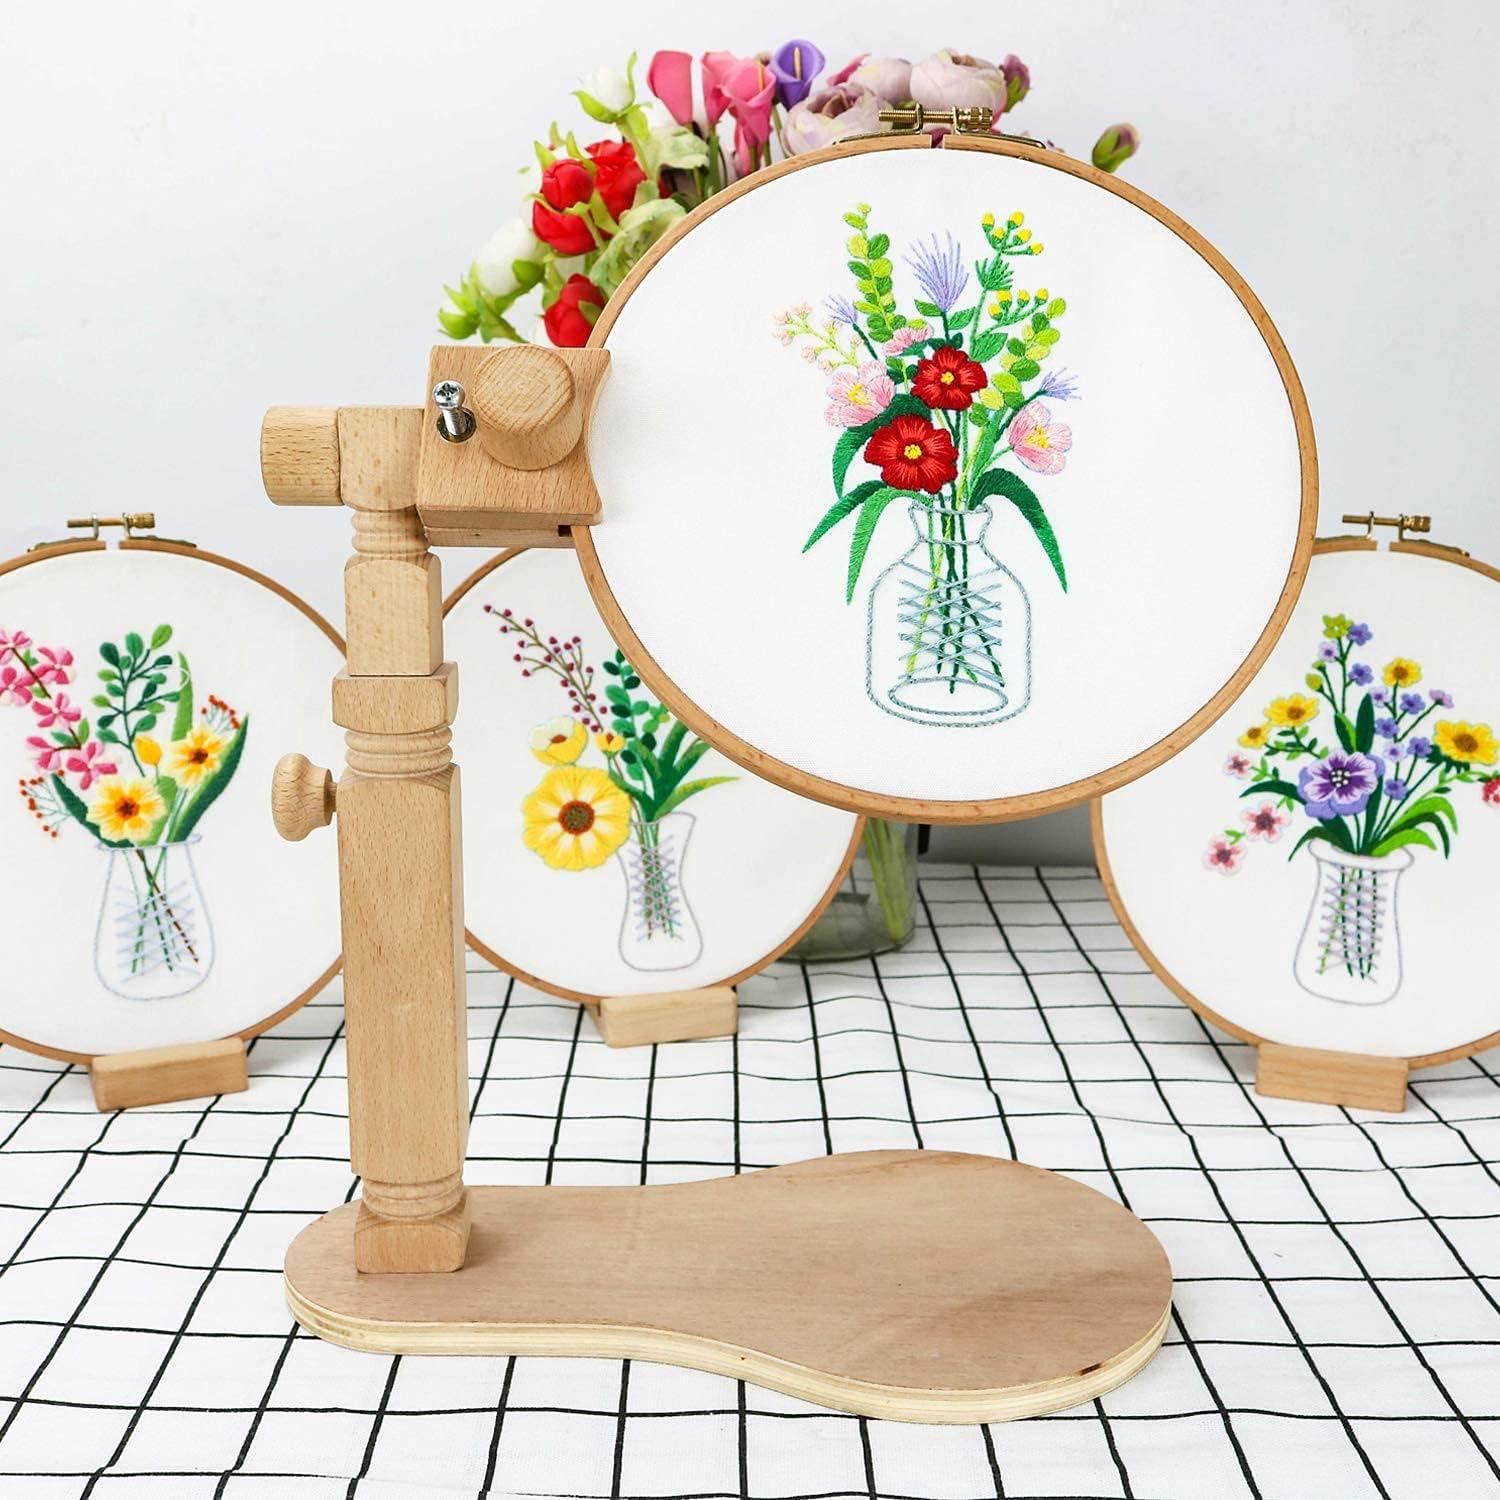 10cm Embroidery Hoop Frames for Display - Oval Small Cross Stitch Hoops  Set, 6 Pieces Resin Imitated Wood Hoop Hanging Frame Circle for Craft  Decoration by guofa - Shop Online for Arts